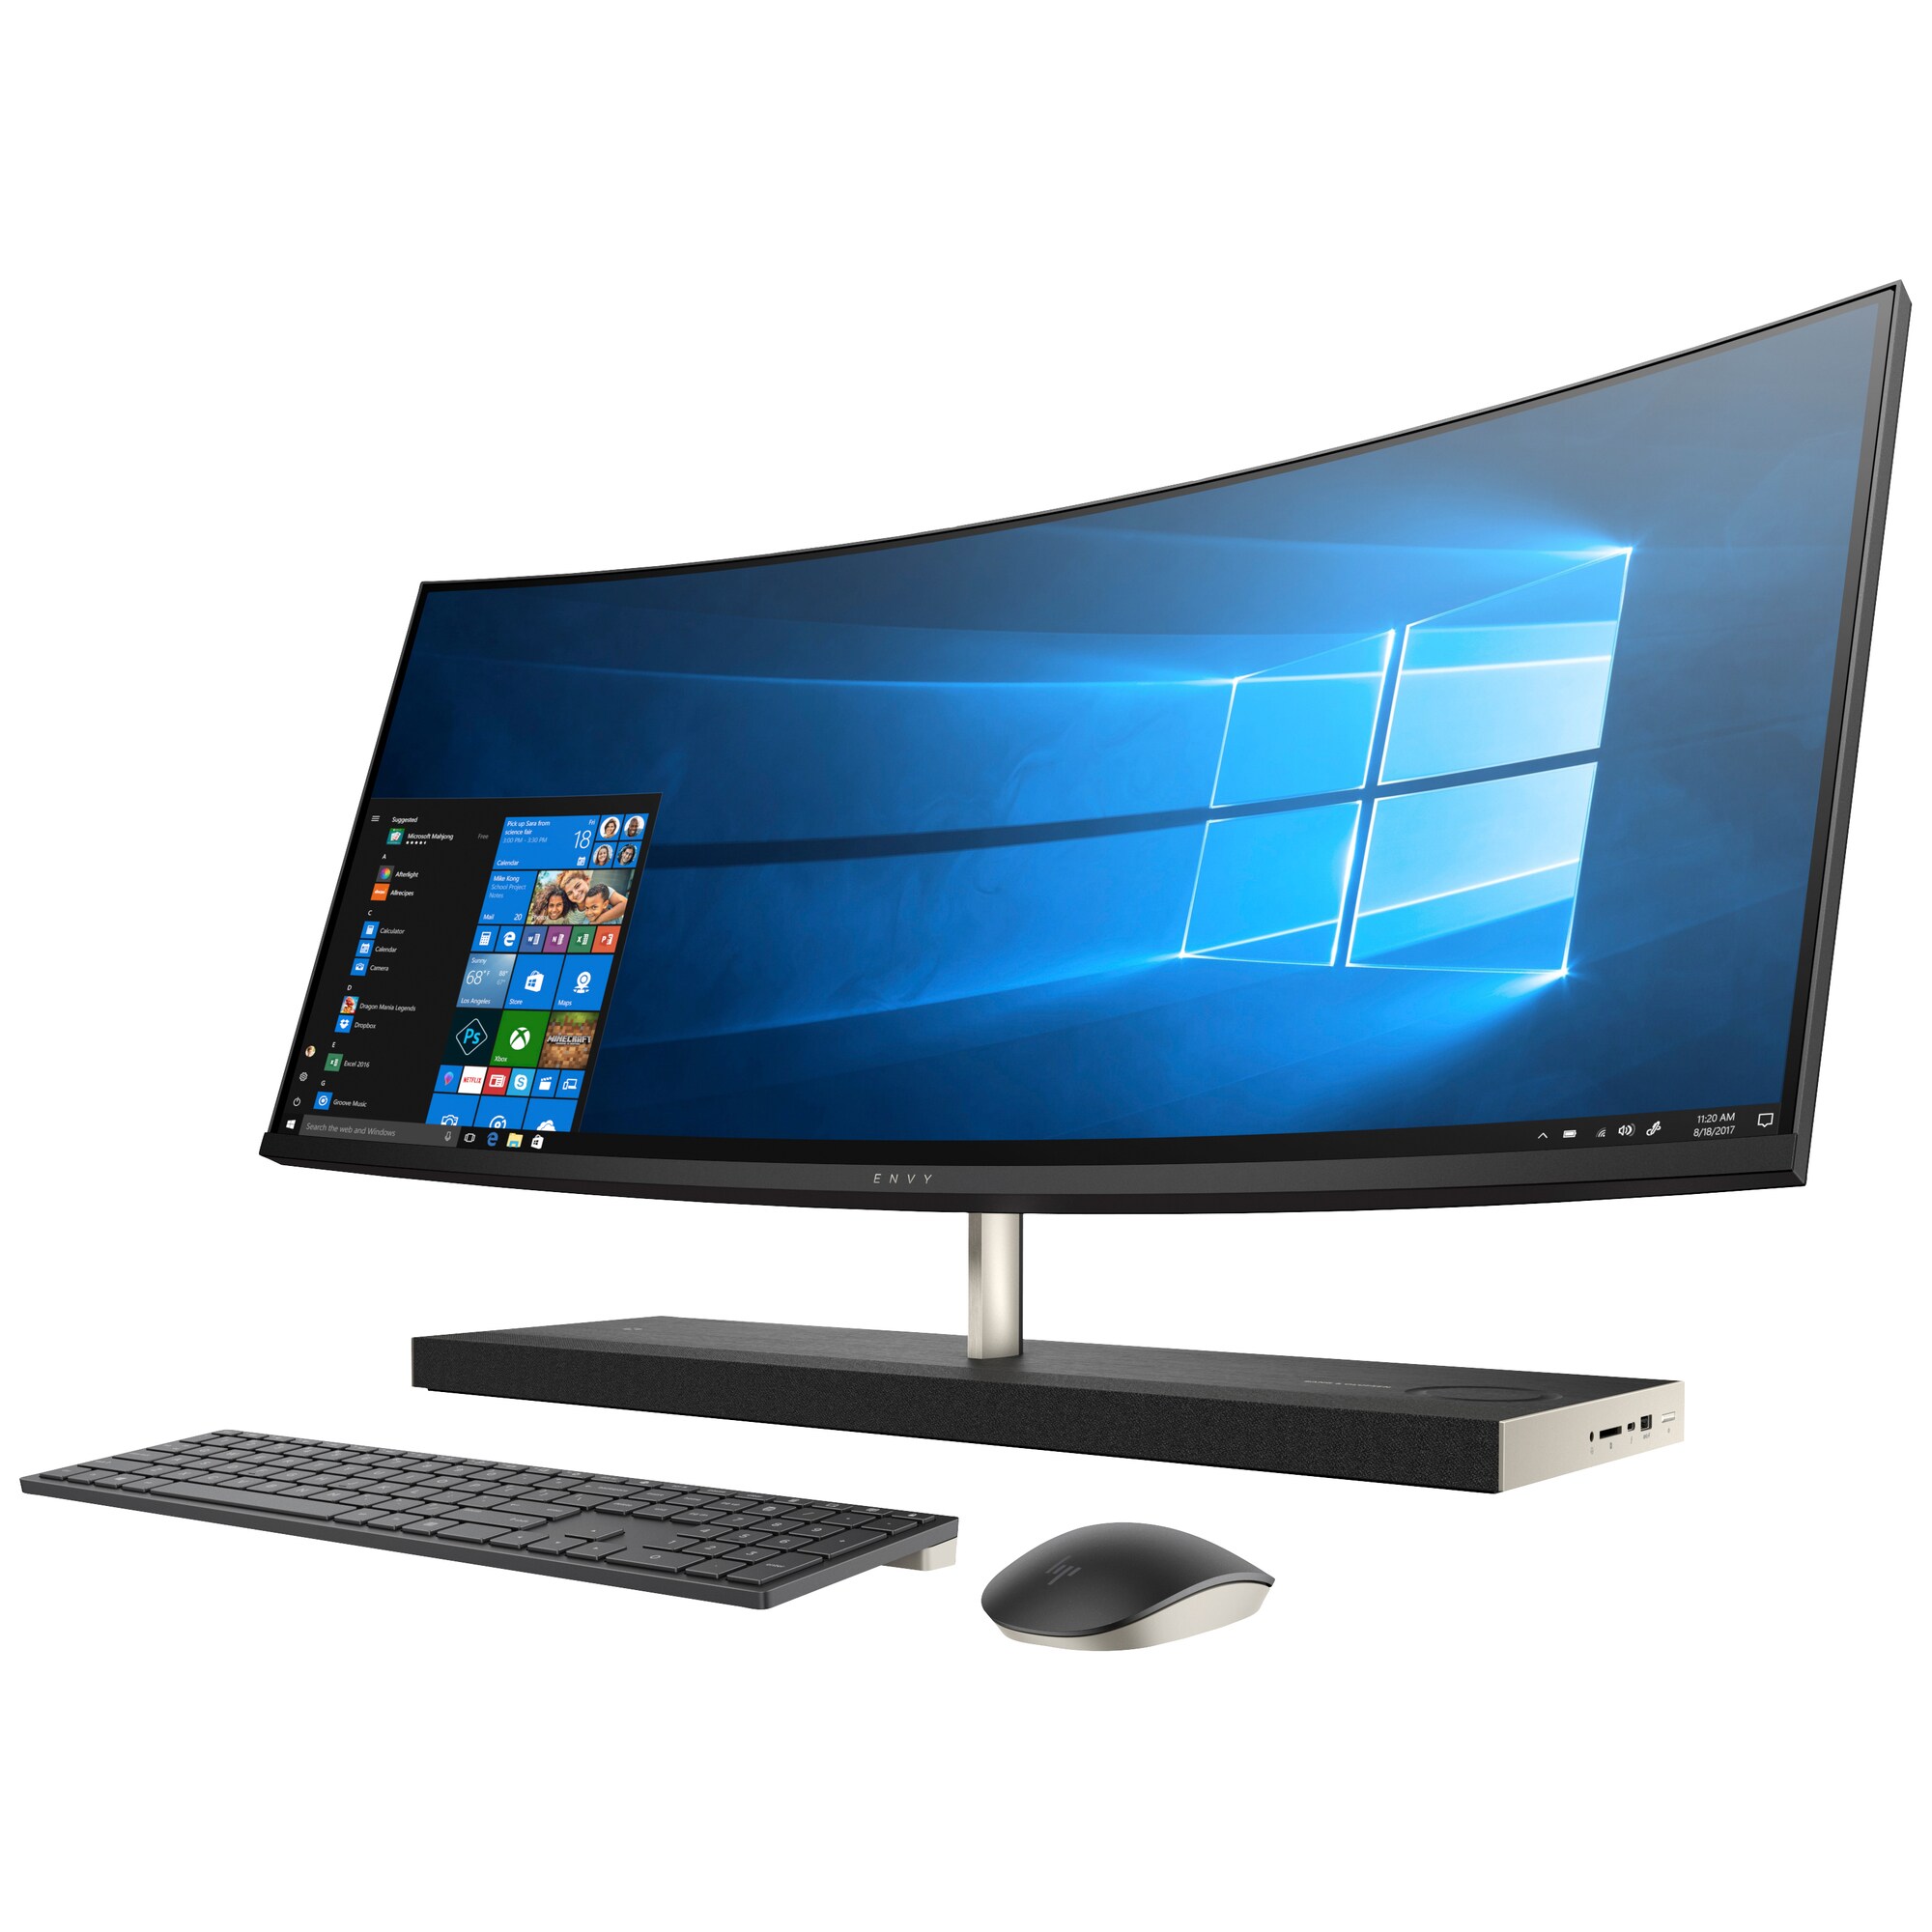 HP Envy 34-b120no buet 34" all-in-one stationær computer ...